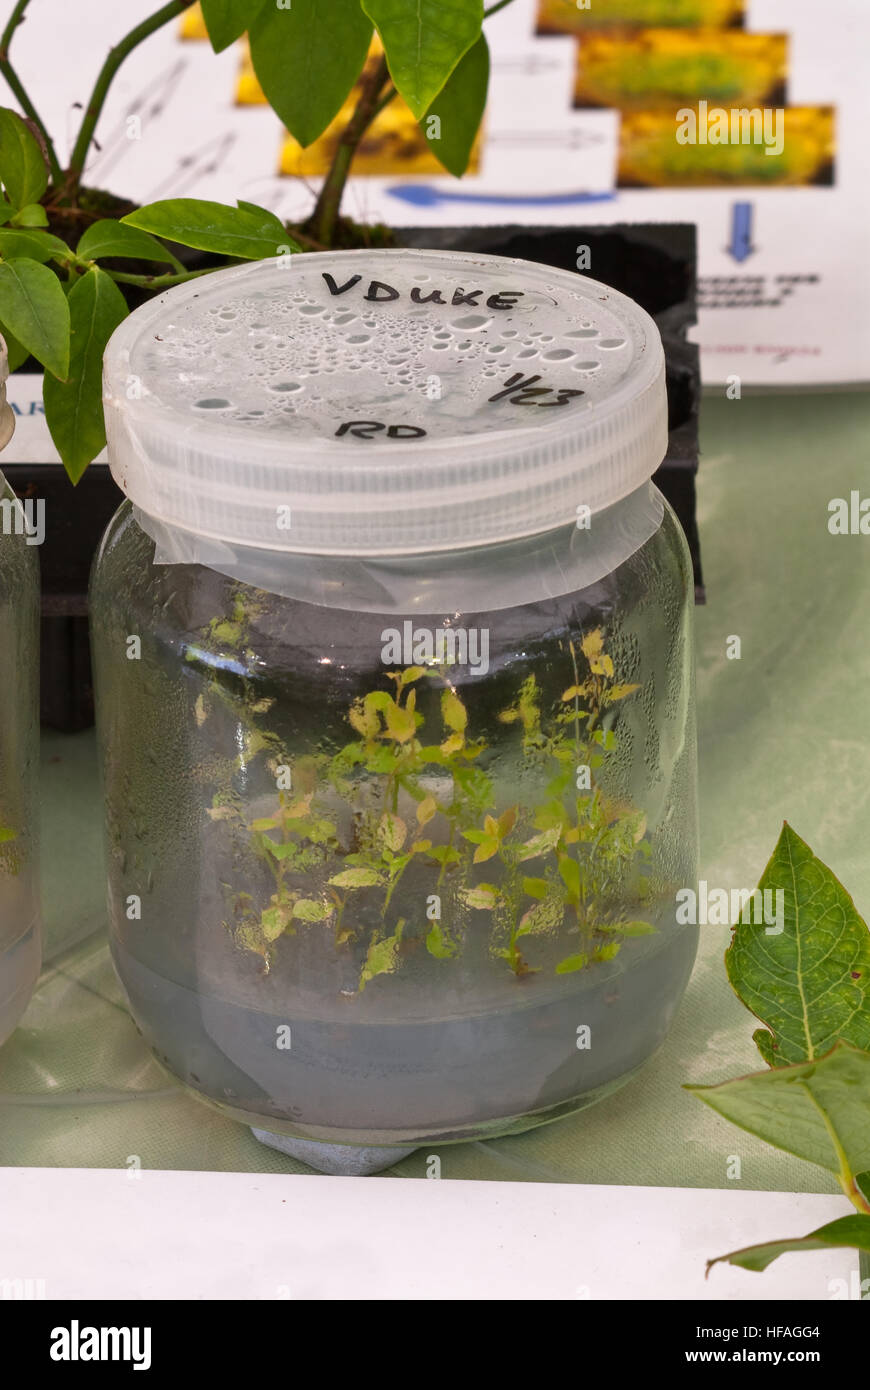 Young plants sterile lab jars propagated laboratory conditions, Duke blueberry plantlets cloning scientific artificial methods apparatus Stock Photo